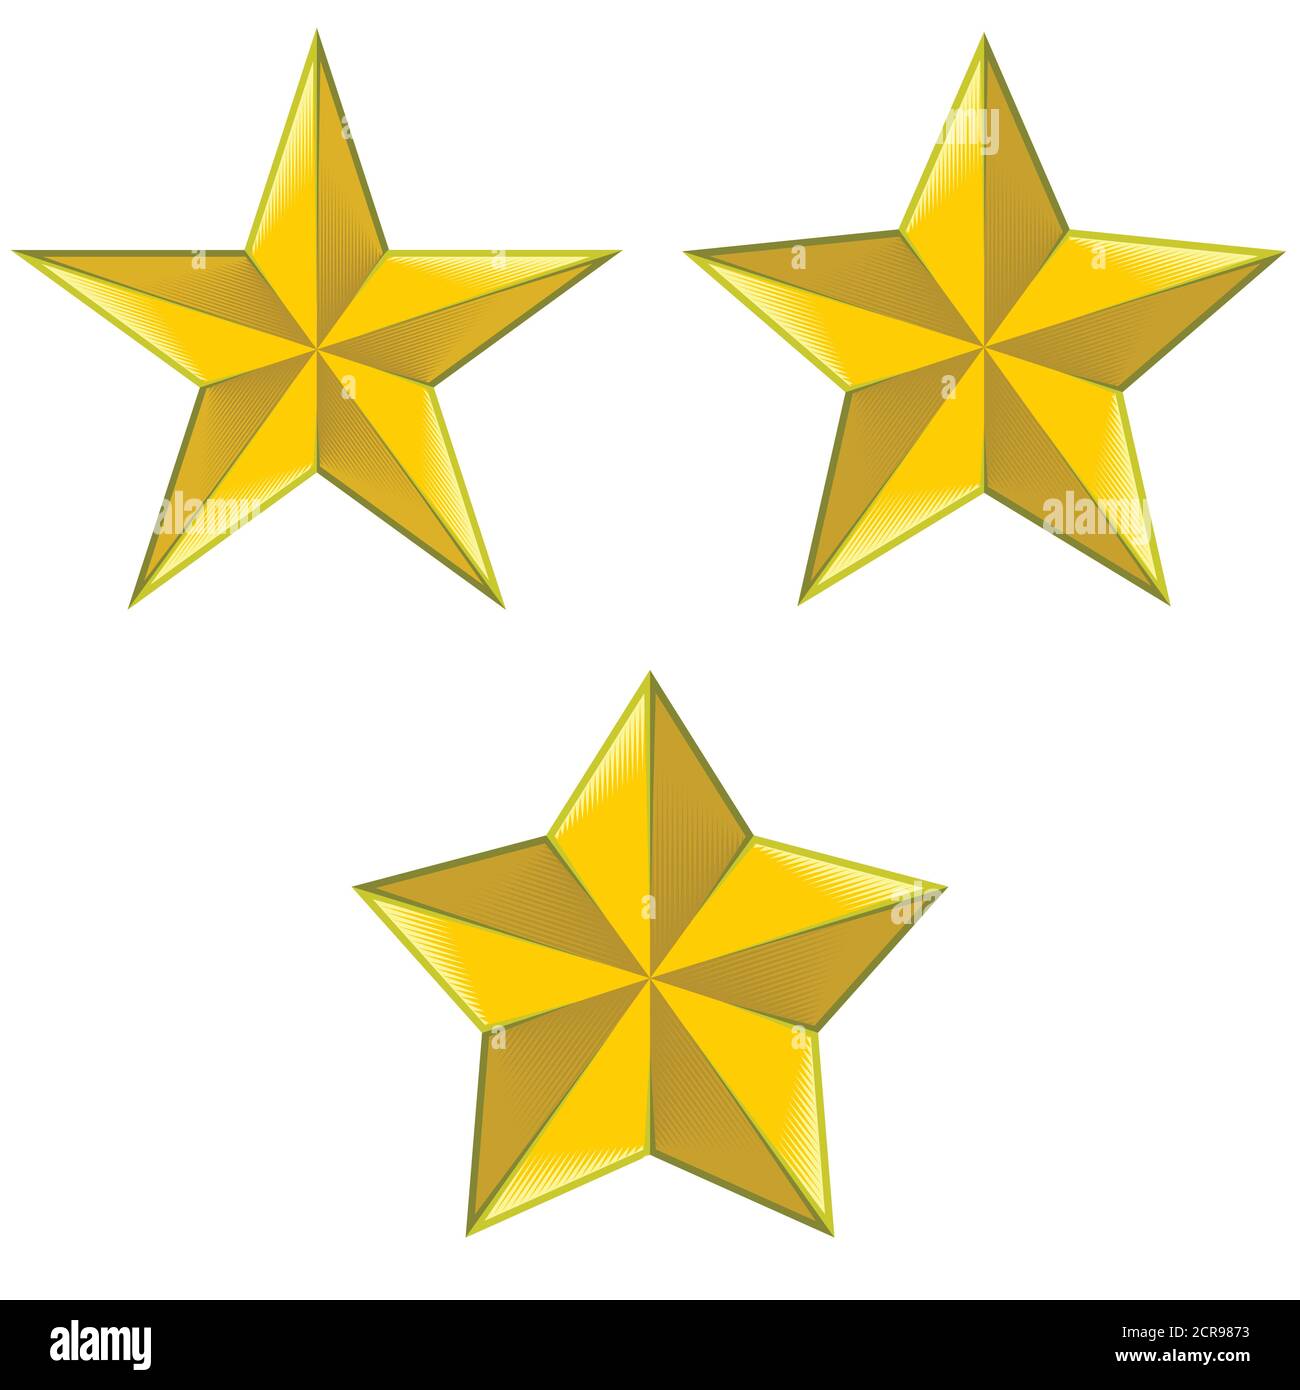 Vector design of three type of 5-pointed stars in gold color, all on white background Stock Vector